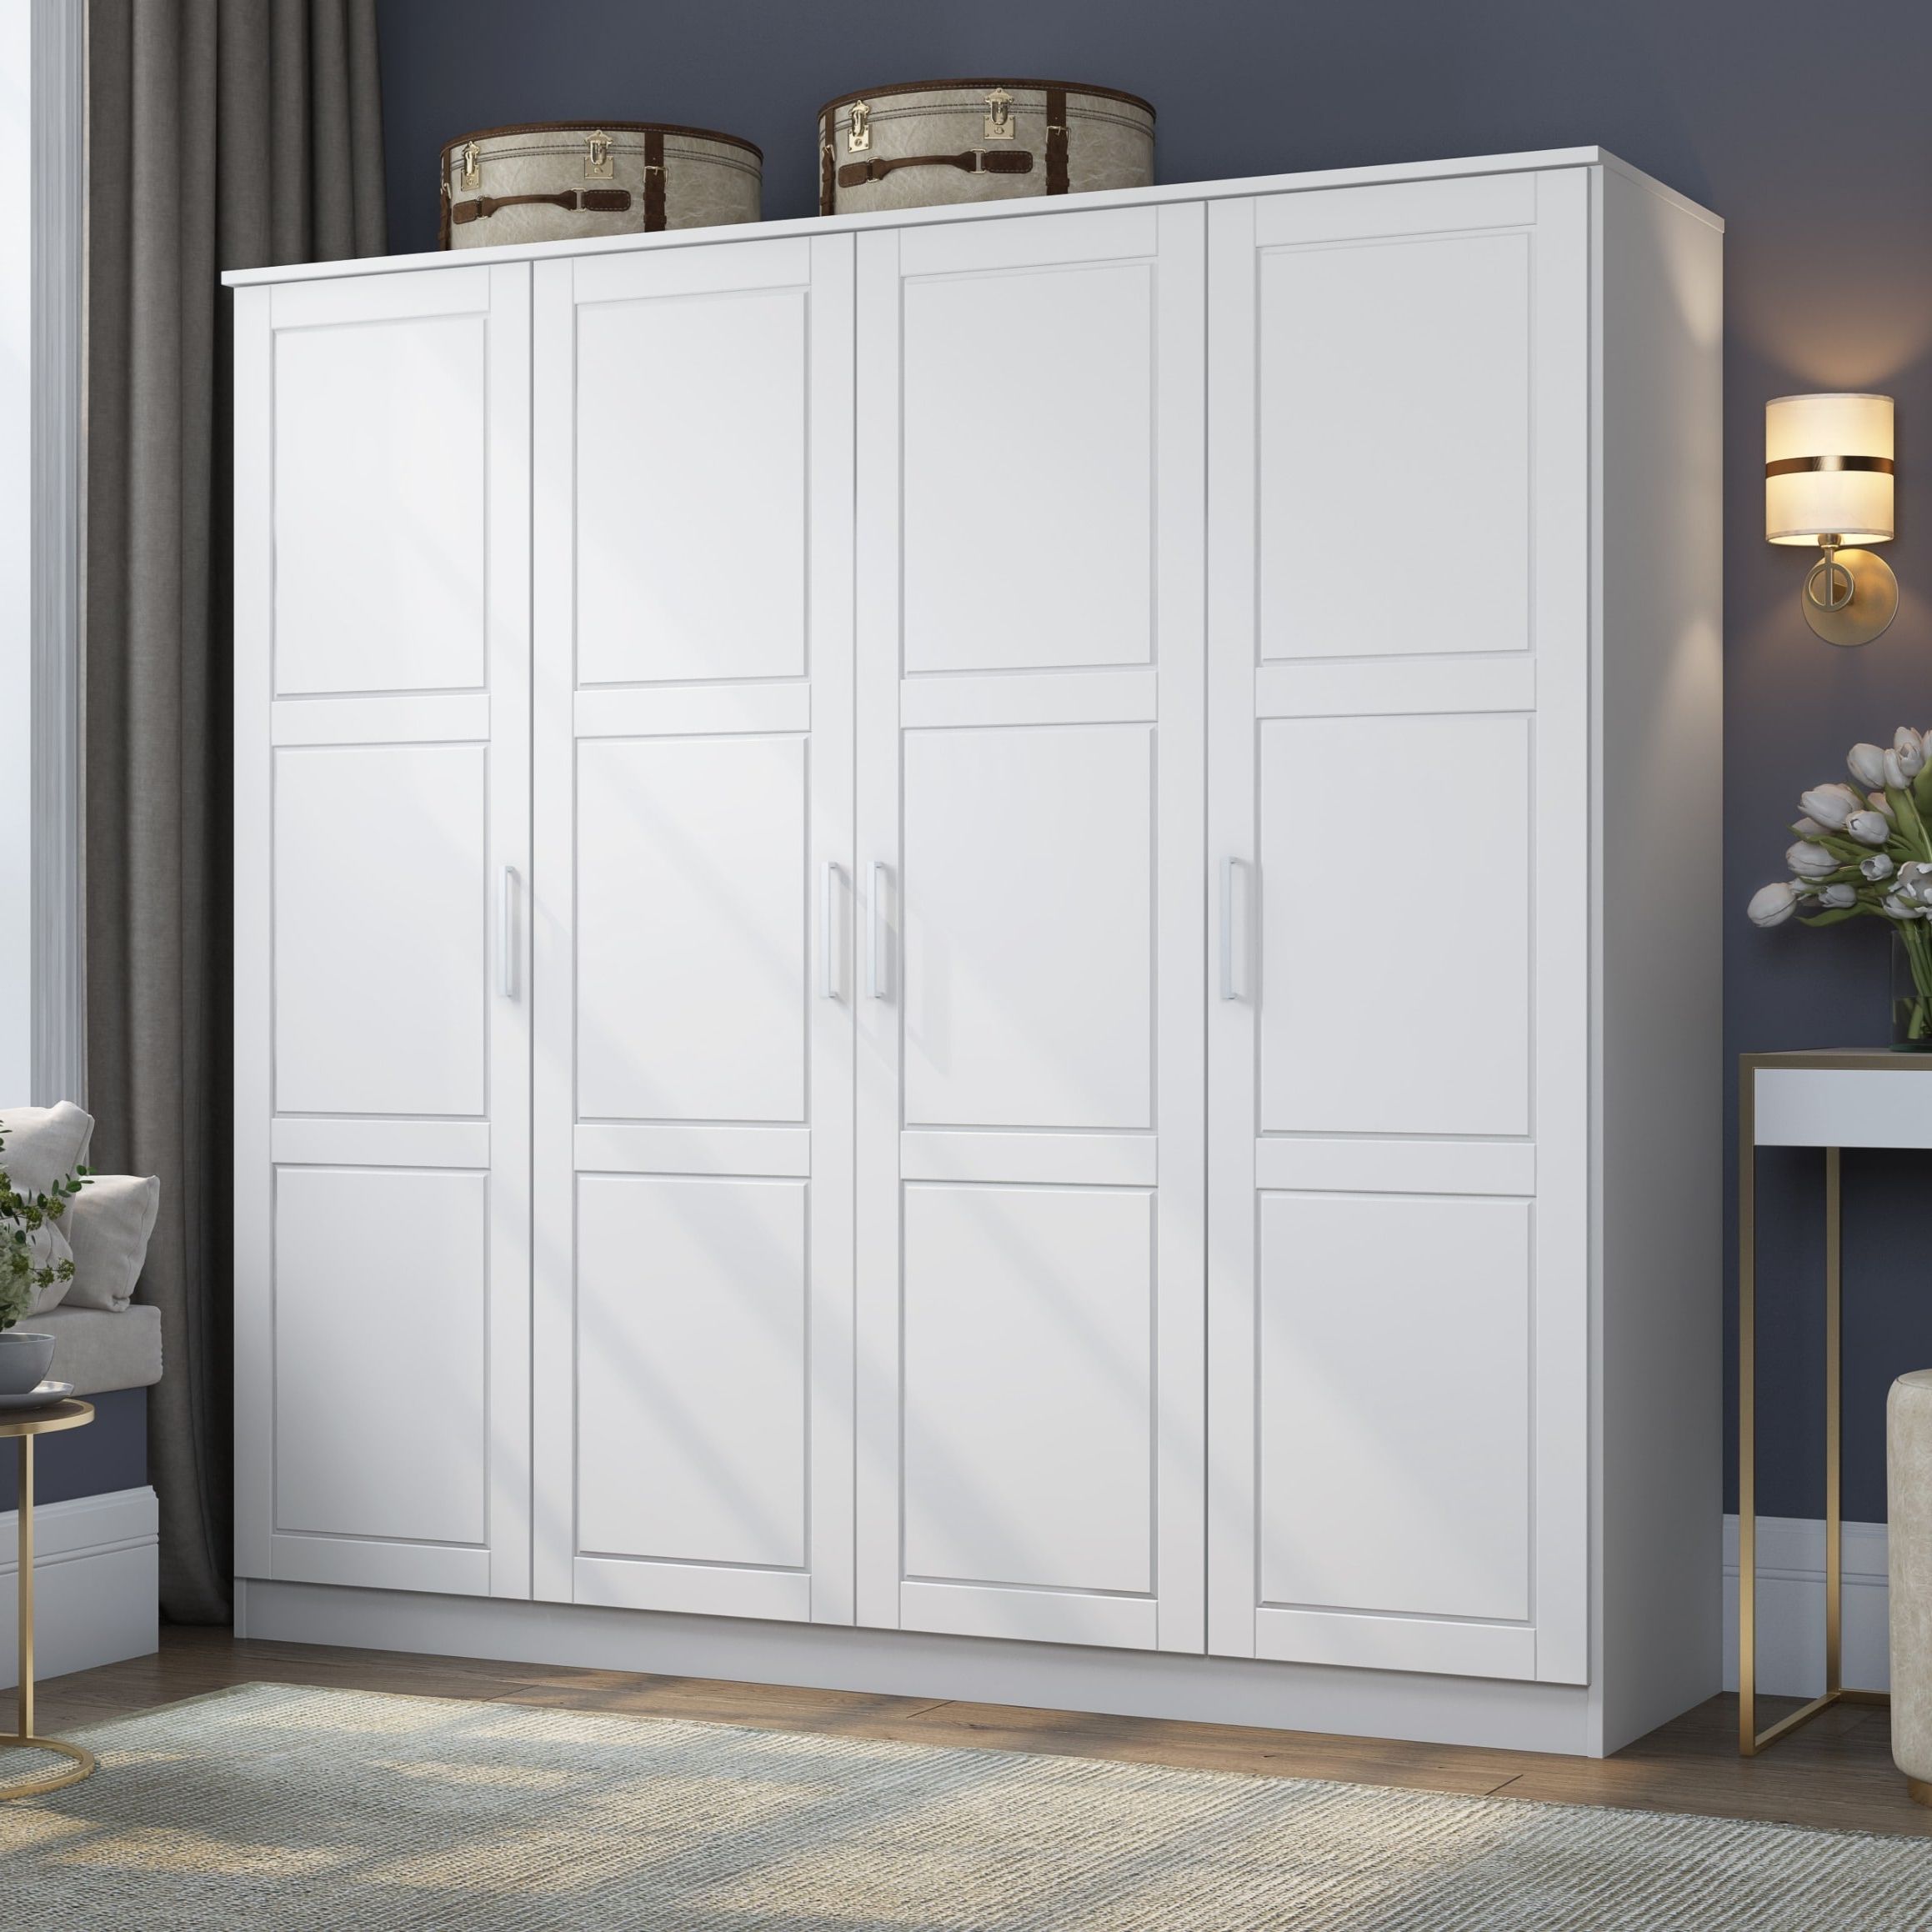 100% Solid Wood Cosmo 4 Door Wardrobe With Solid Wood Or Mirrored Doors –  On Sale – Bed Bath & Beyond – 37717187 Pertaining To White 3 Door Wardrobes (Gallery 19 of 20)